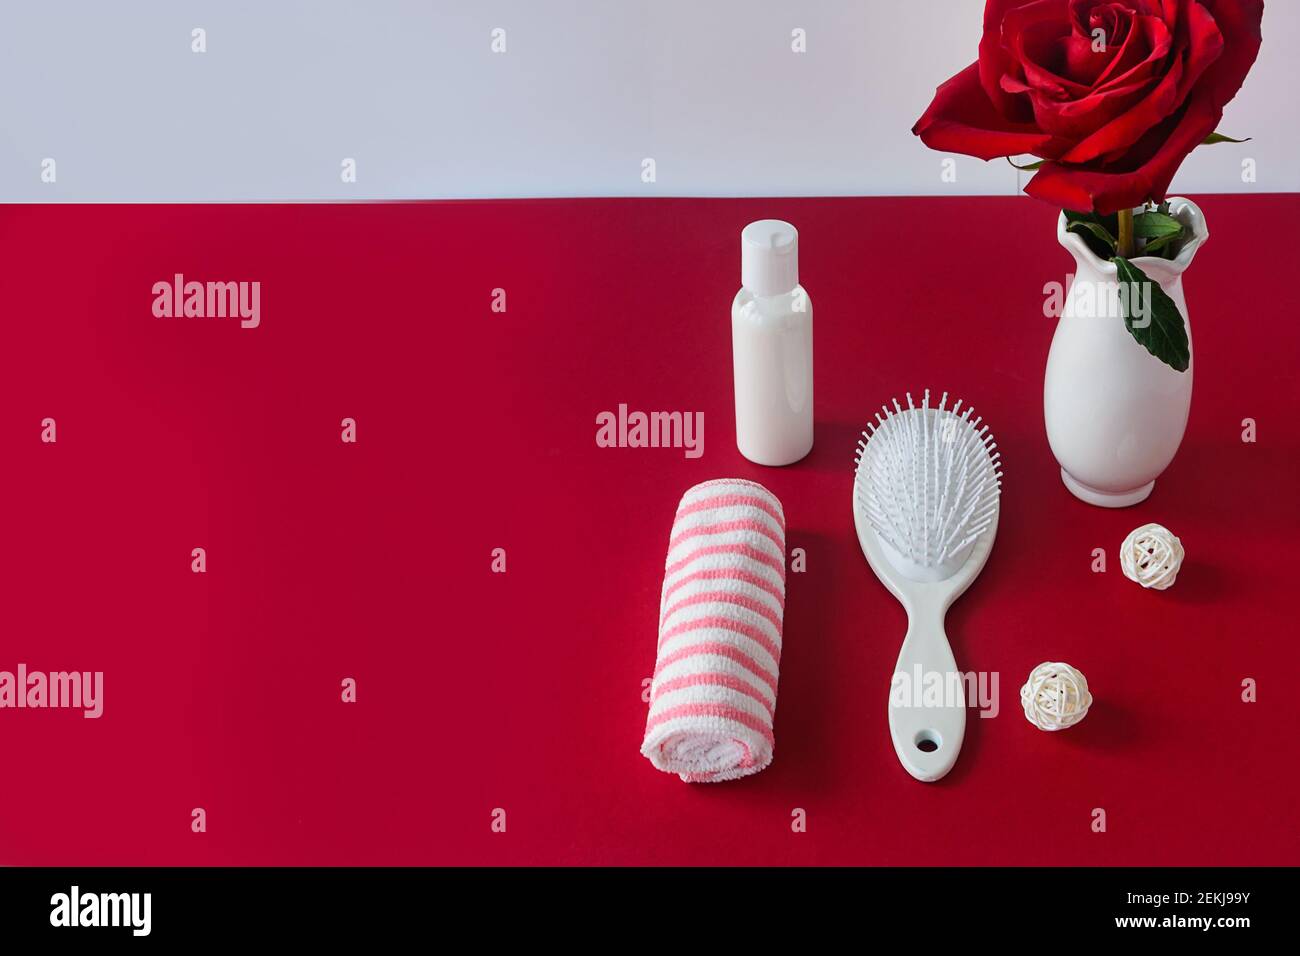 Hair care concept. White hair brush, shampoo and towel on red velvet table with rose flower. Selective focus, copy space. Stock Photo